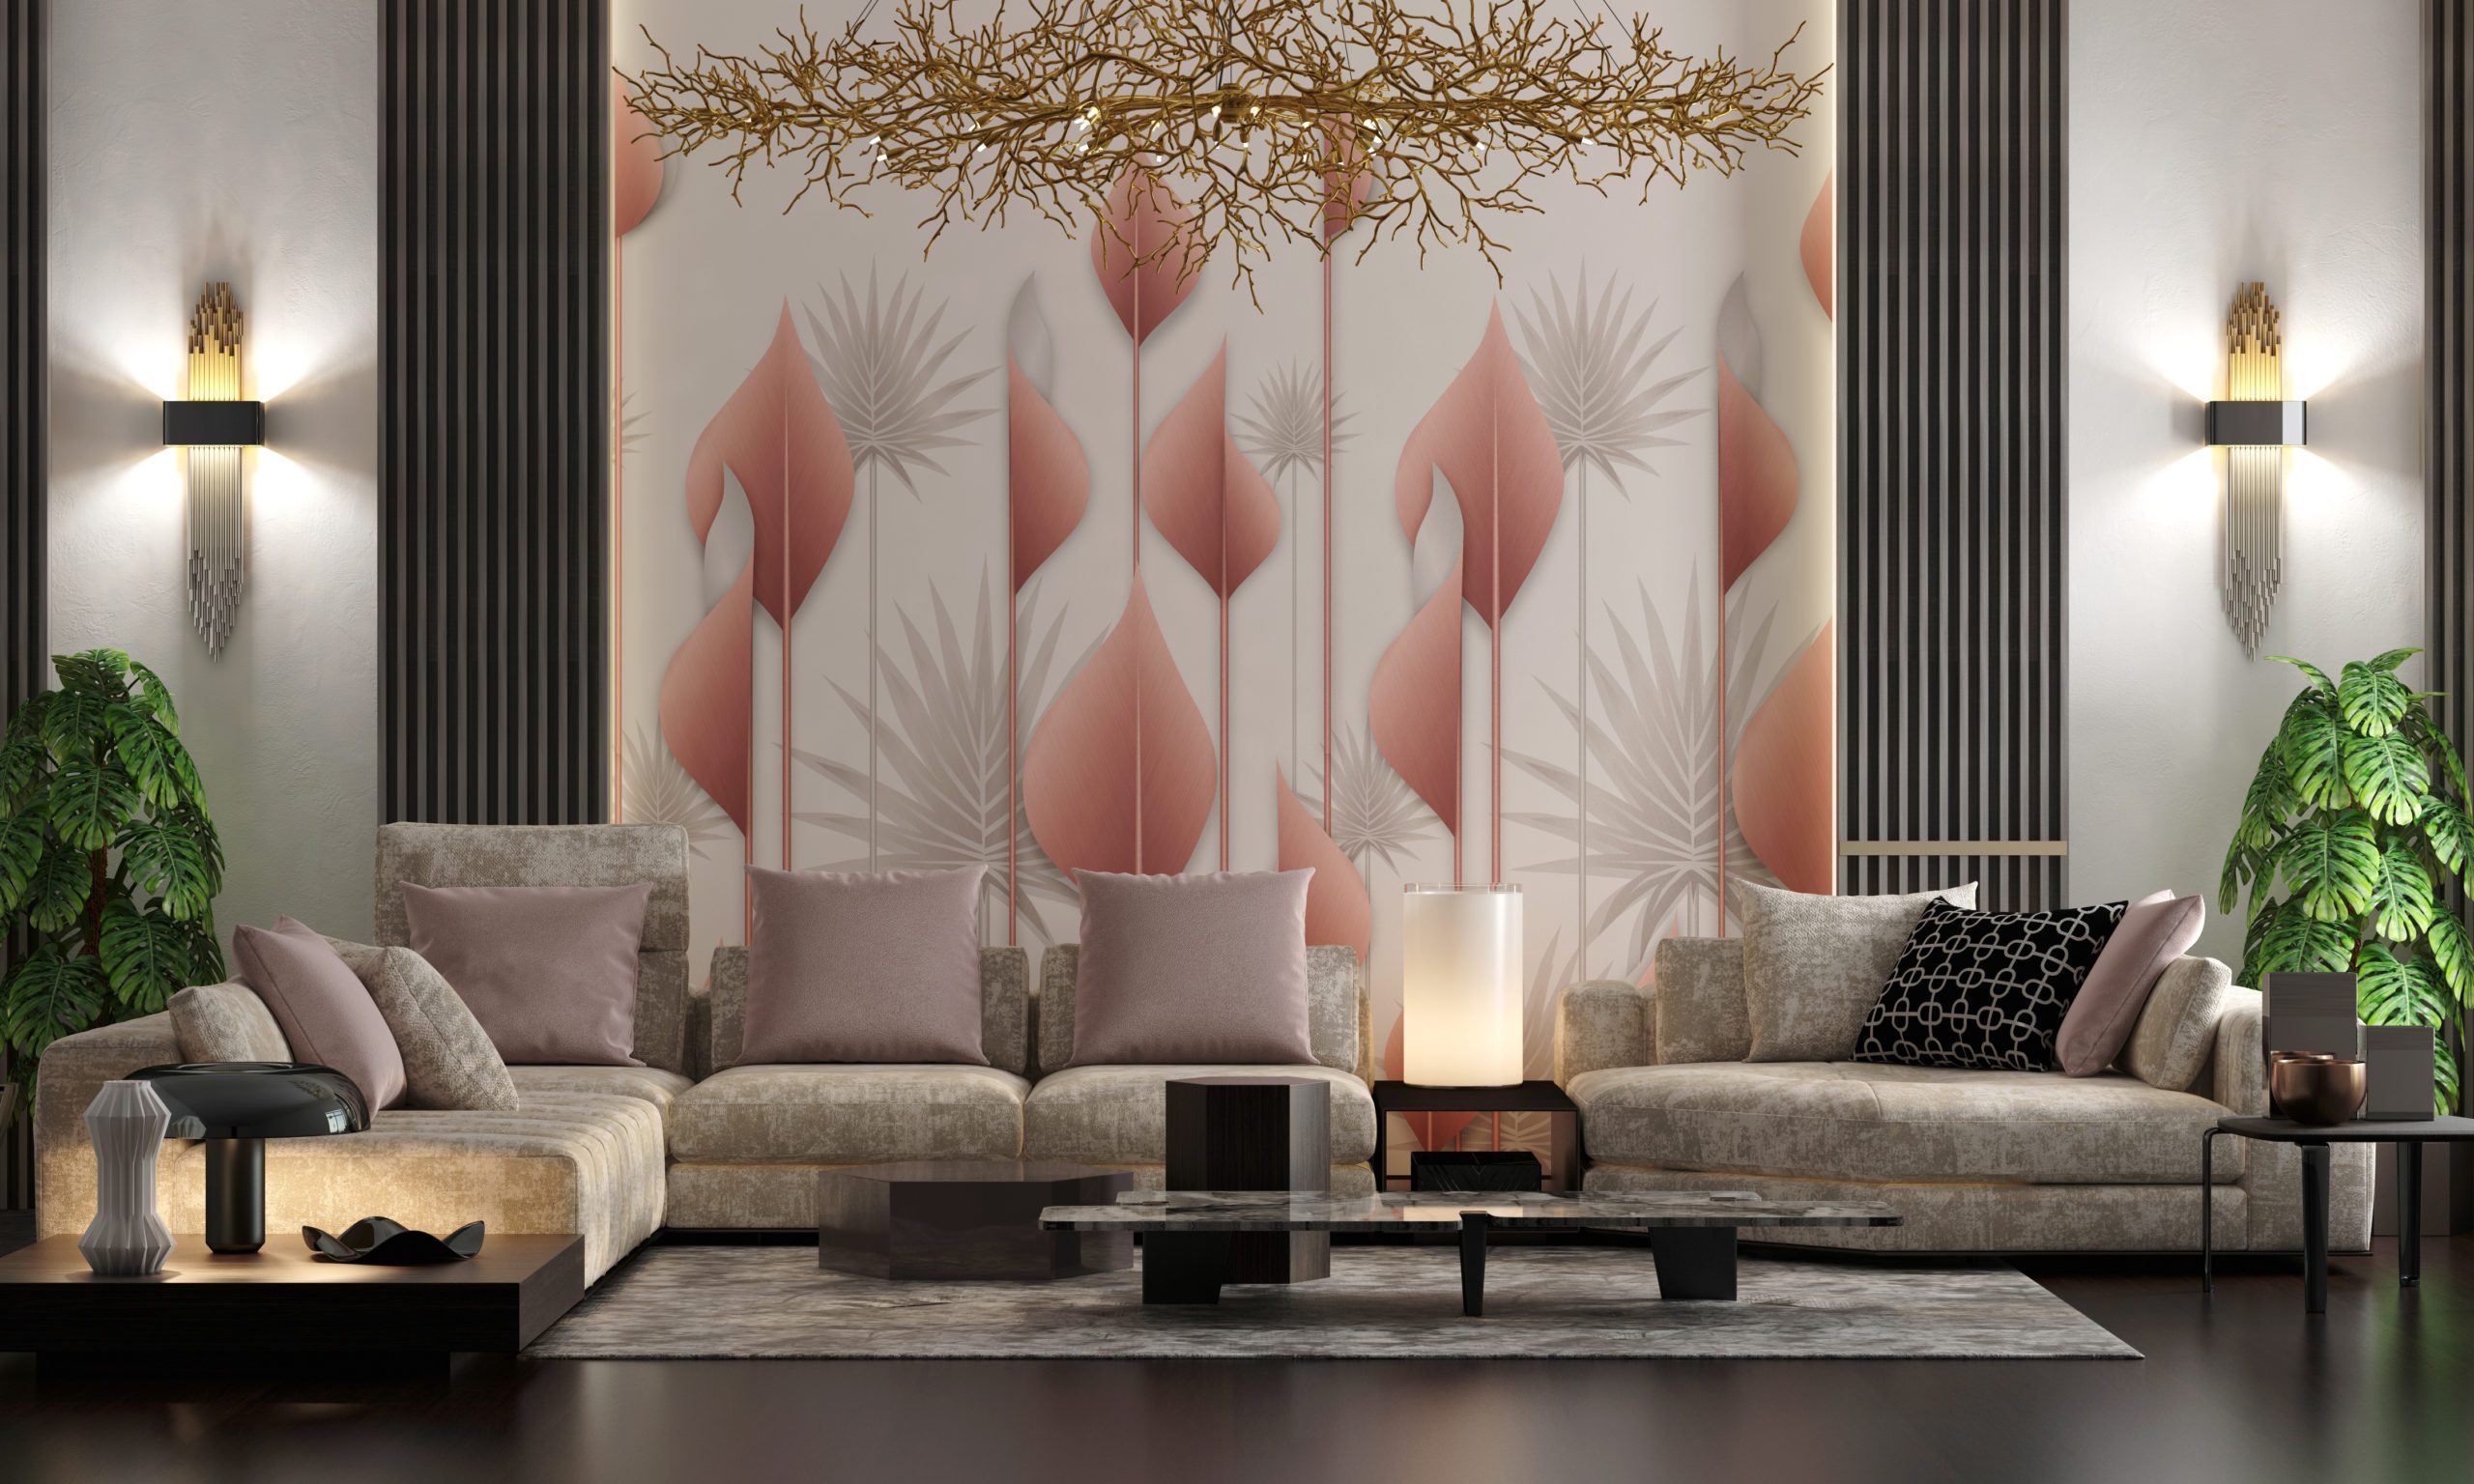 Modern Living Room Design And Decoration Of Wallpaper Of Plant B